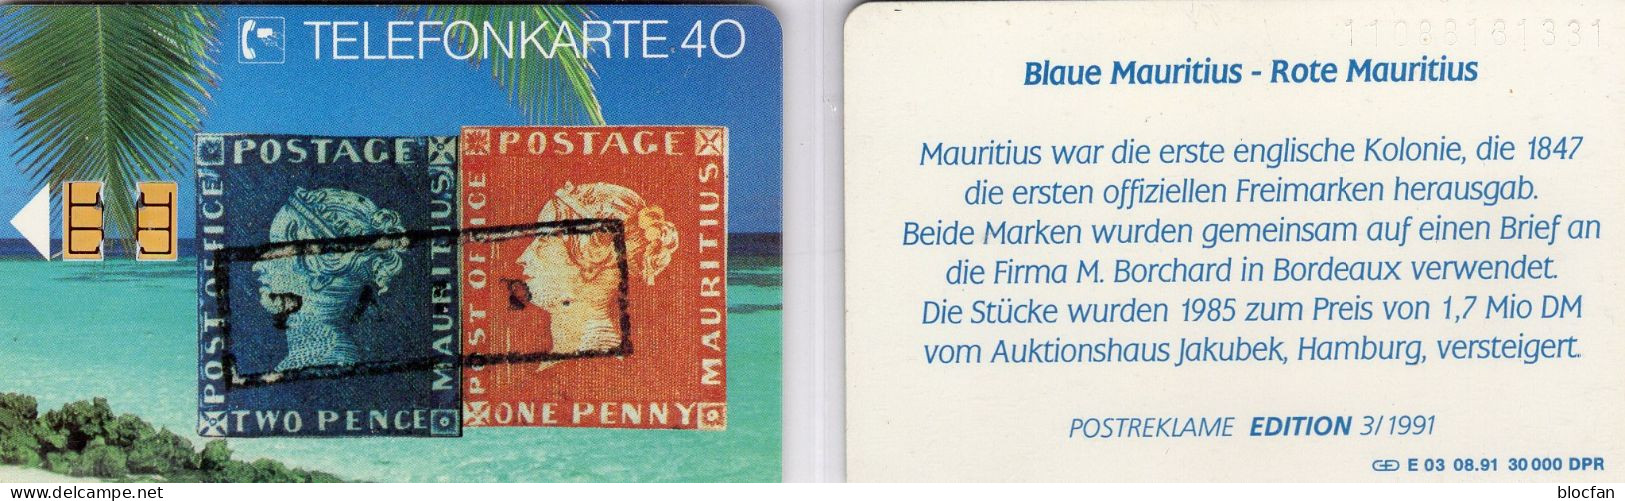 Blaue/rote Mauritius TK E03/1991 30.000Expl. ** 25€ Edition1 Kolonie Der UK/GB TC History Stamps On Phonecard Of Germany - E-Reeksen : Uitgave - D. Postreclame